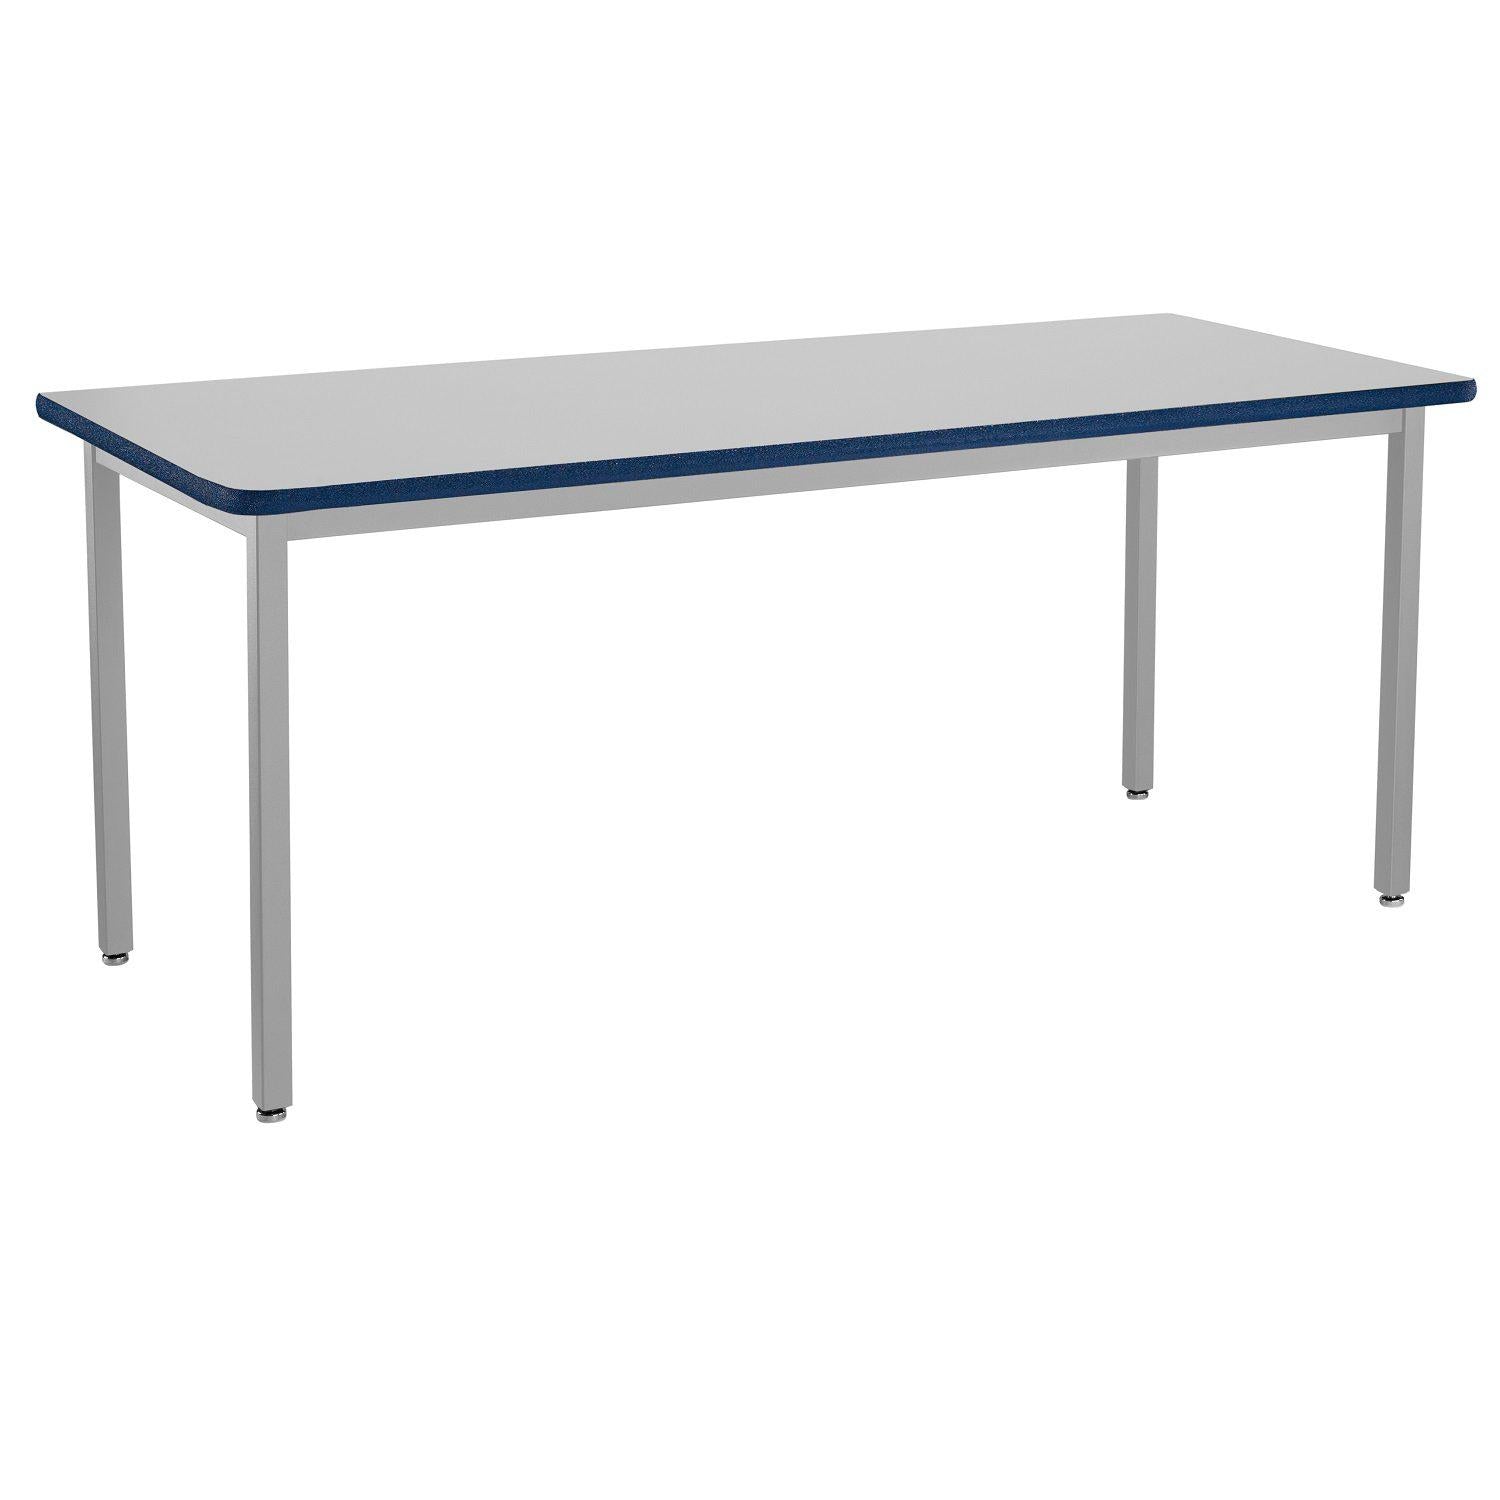 Heavy-Duty Fixed Height Utility Table, Soft Grey Frame, 24" x 96", Supreme High-Pressure Laminate Top with Black ProtectEdge